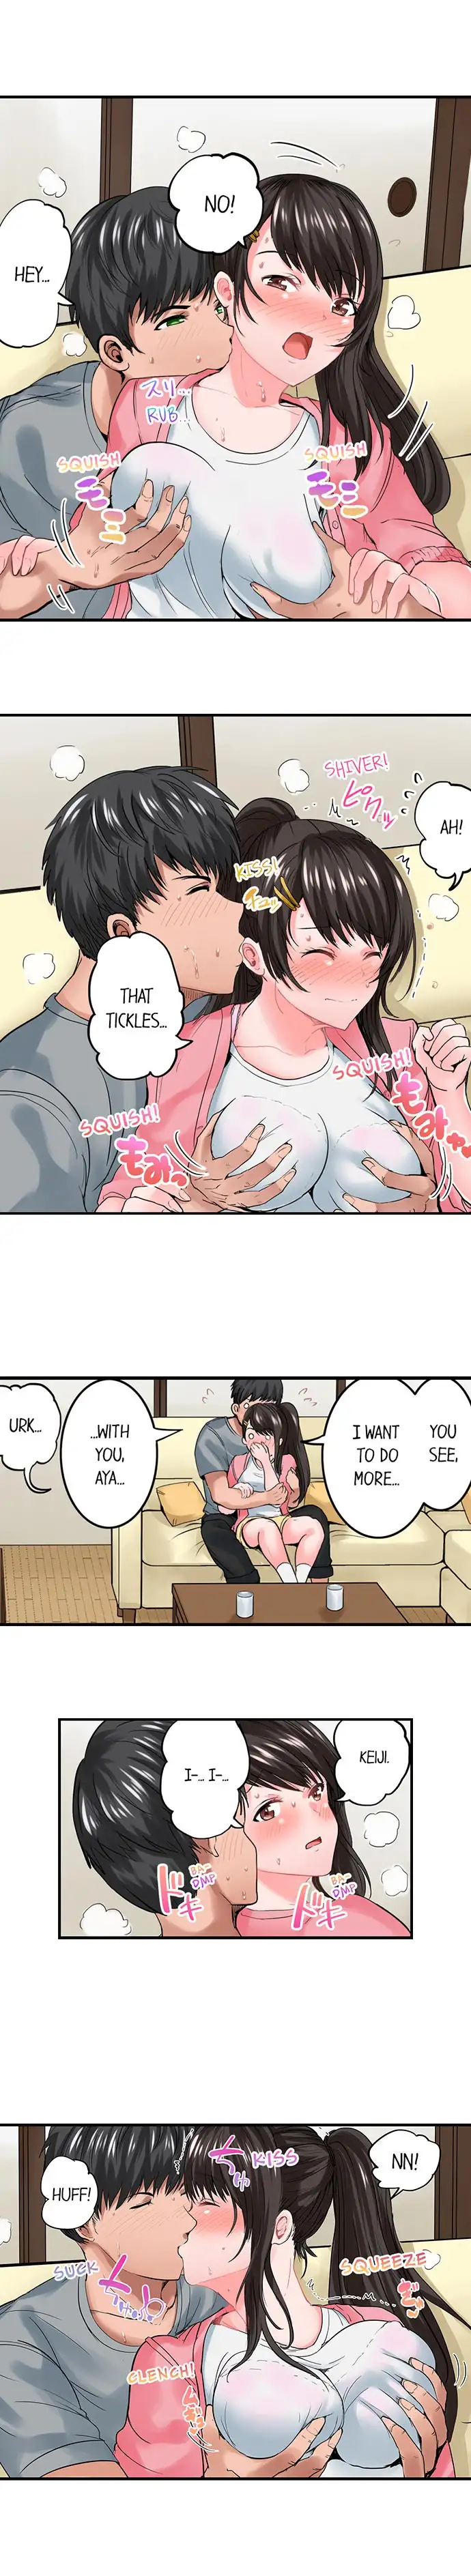 Dick Me Up Inside - Chapter 11 Page 2